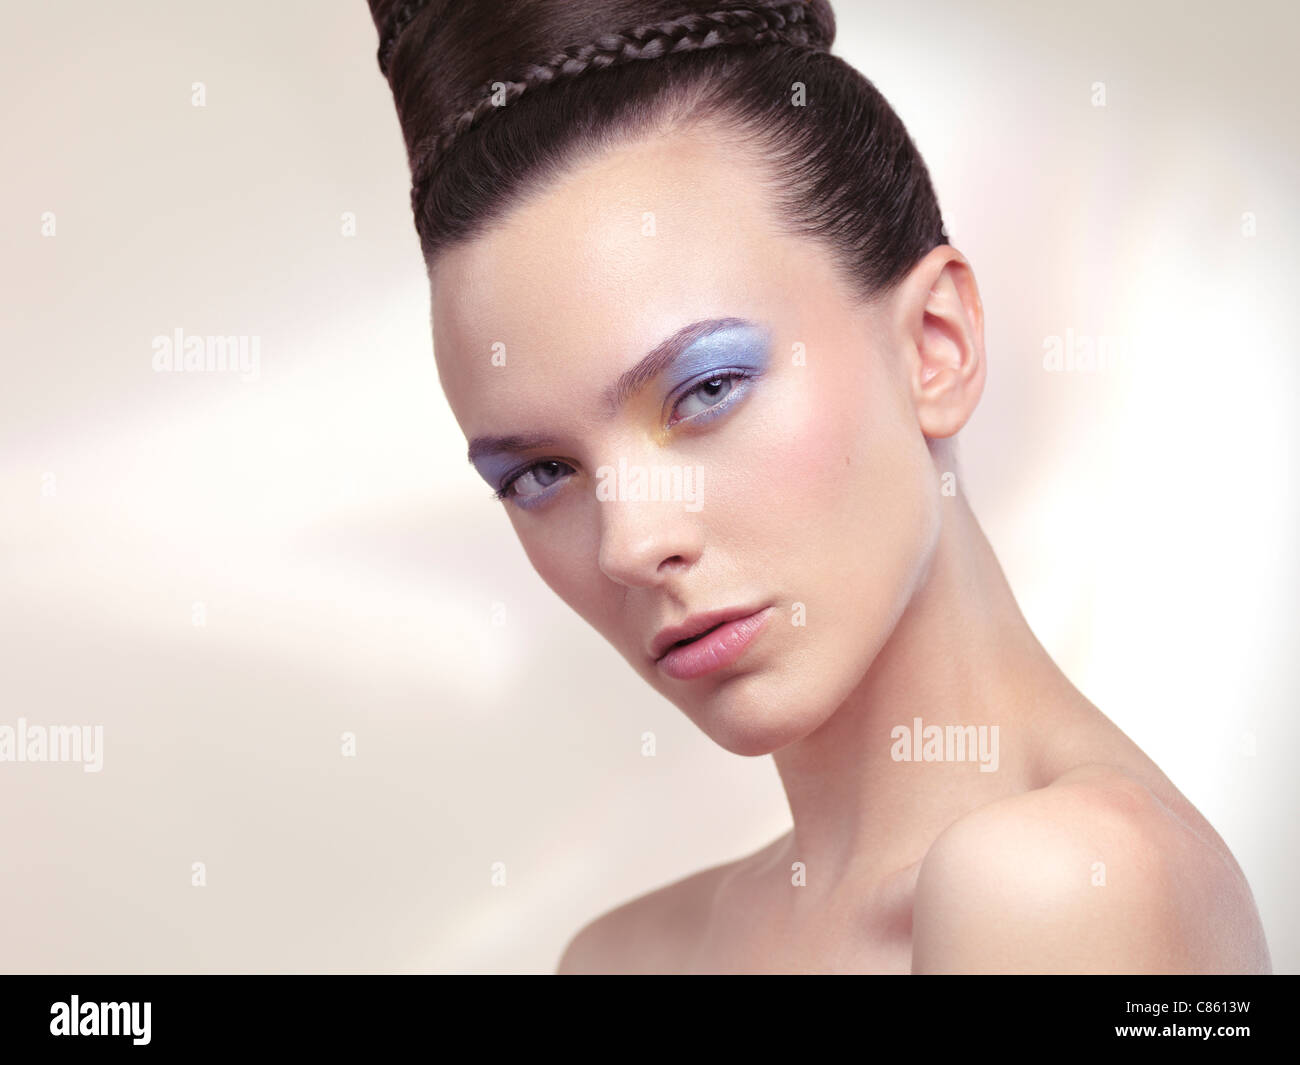 License and prints at MaximImages.com - Beauty portrait of a young woman with wearing soft pastel color makeup and stylish hairstyle Stock Photo